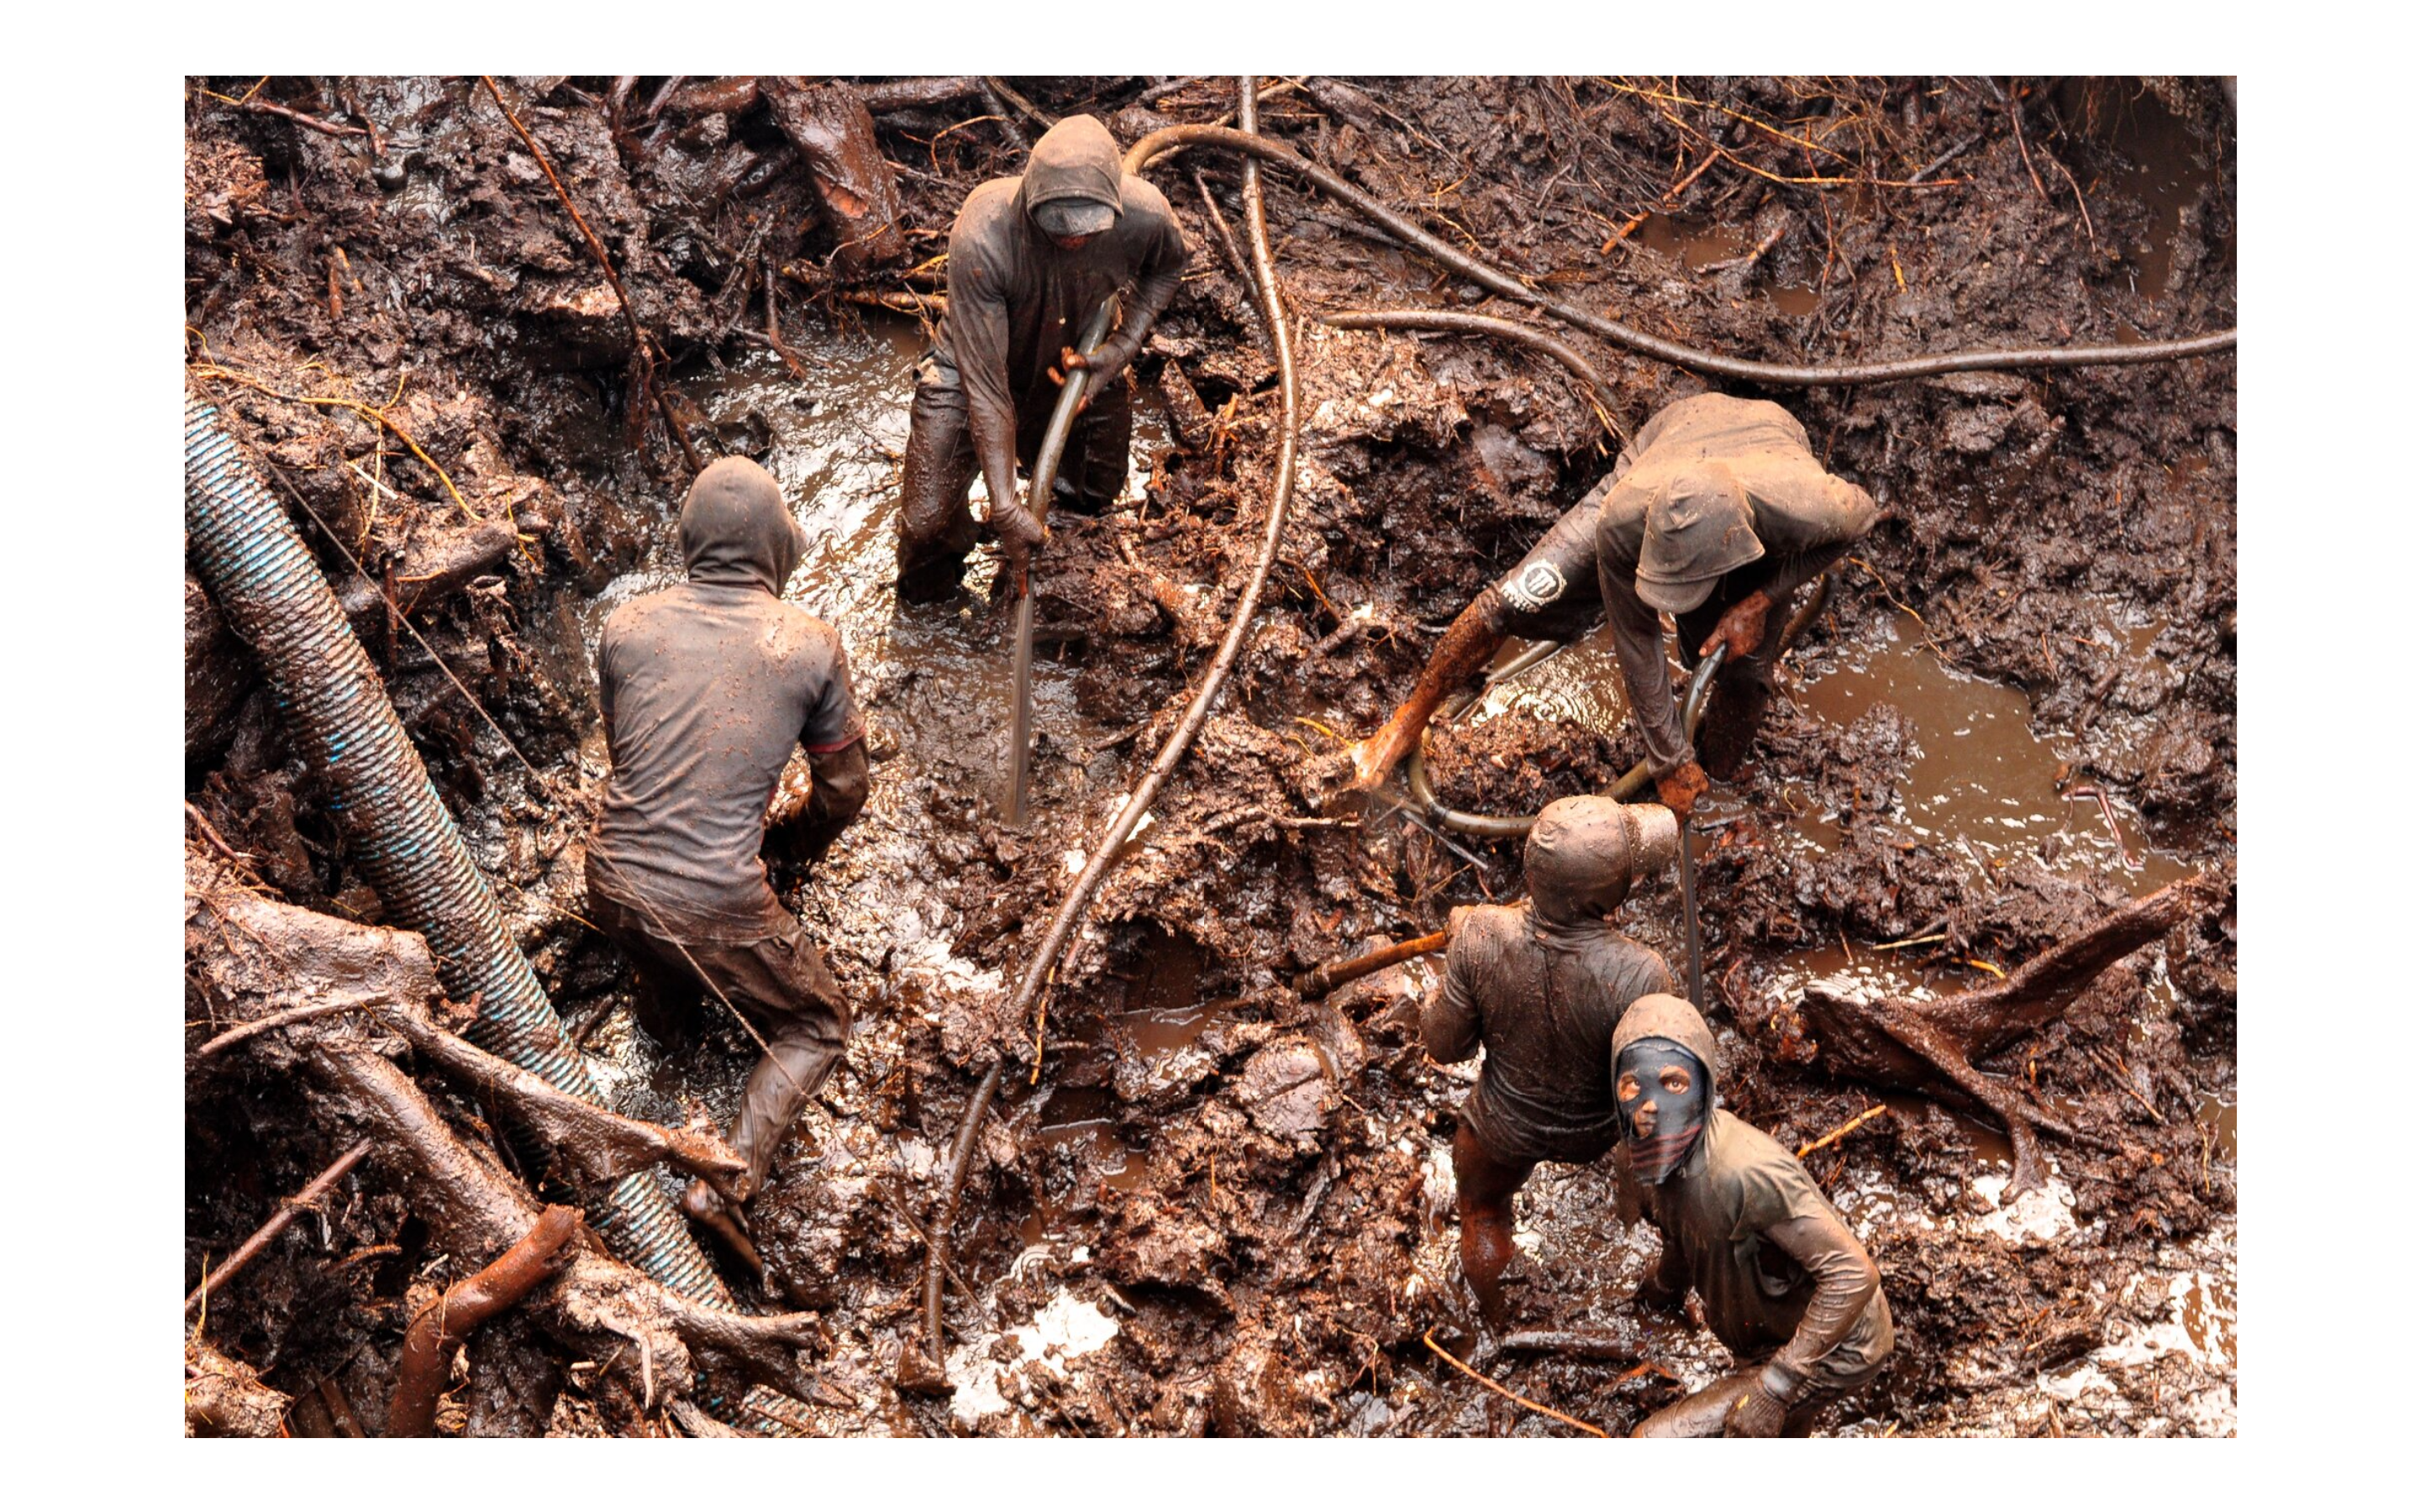 A group of workers laboring in an open pit mine 